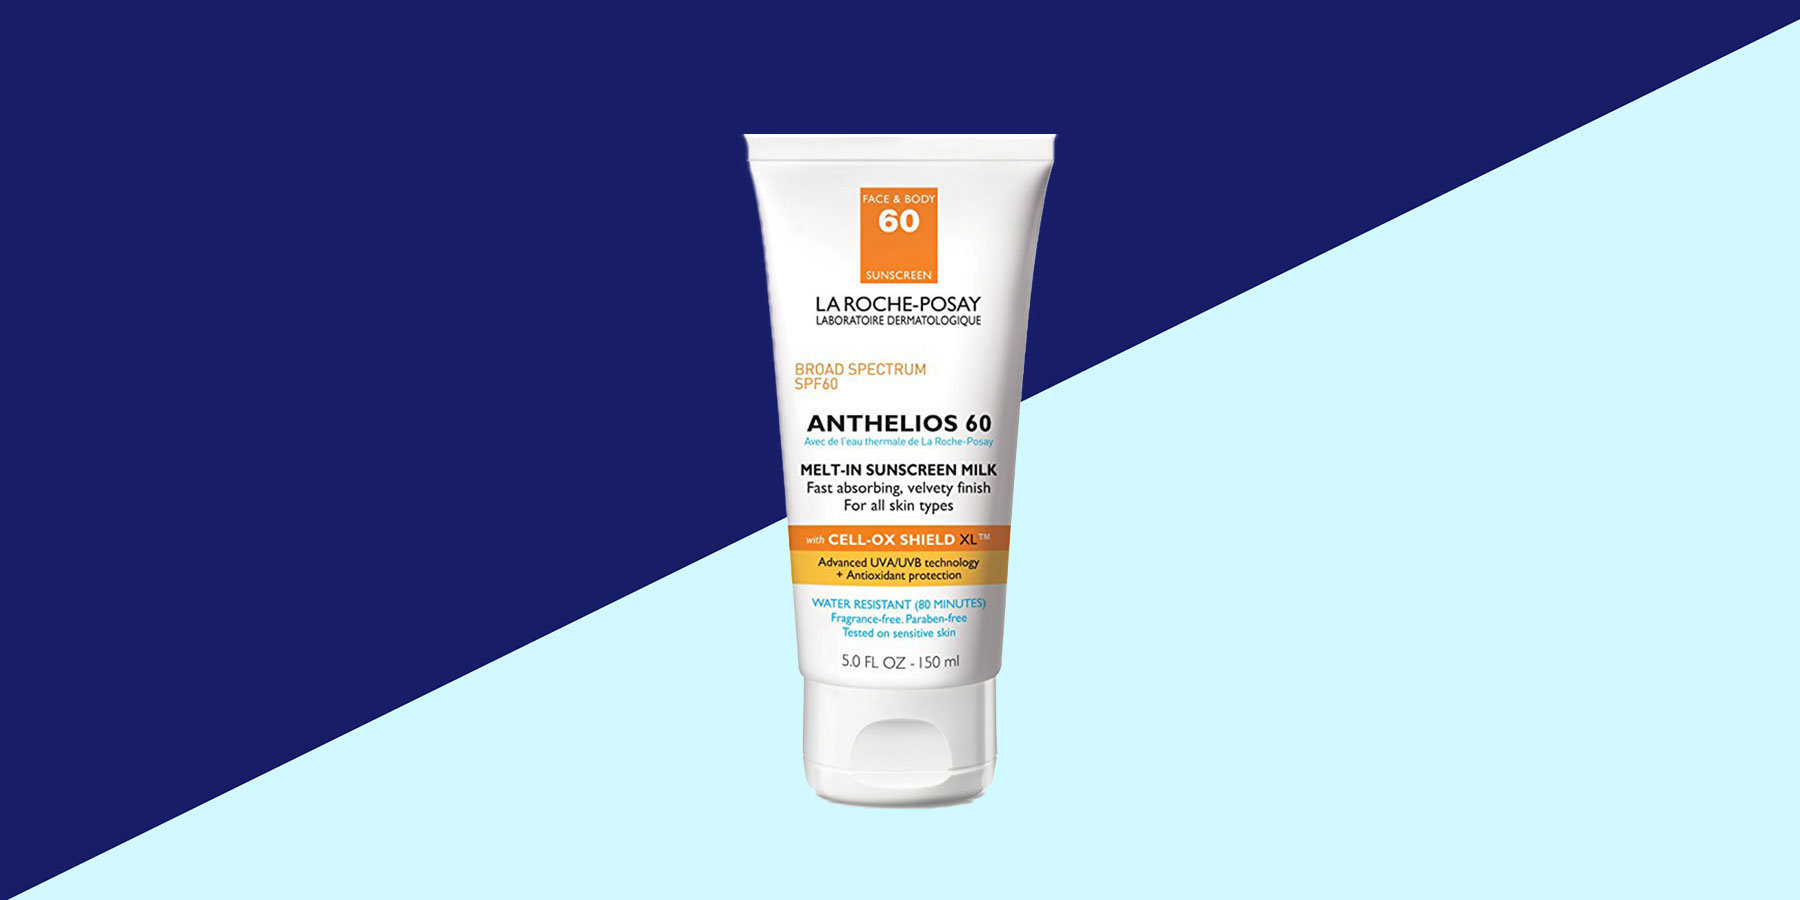 Consumer Reports' No. 1 Best Sunscreen 